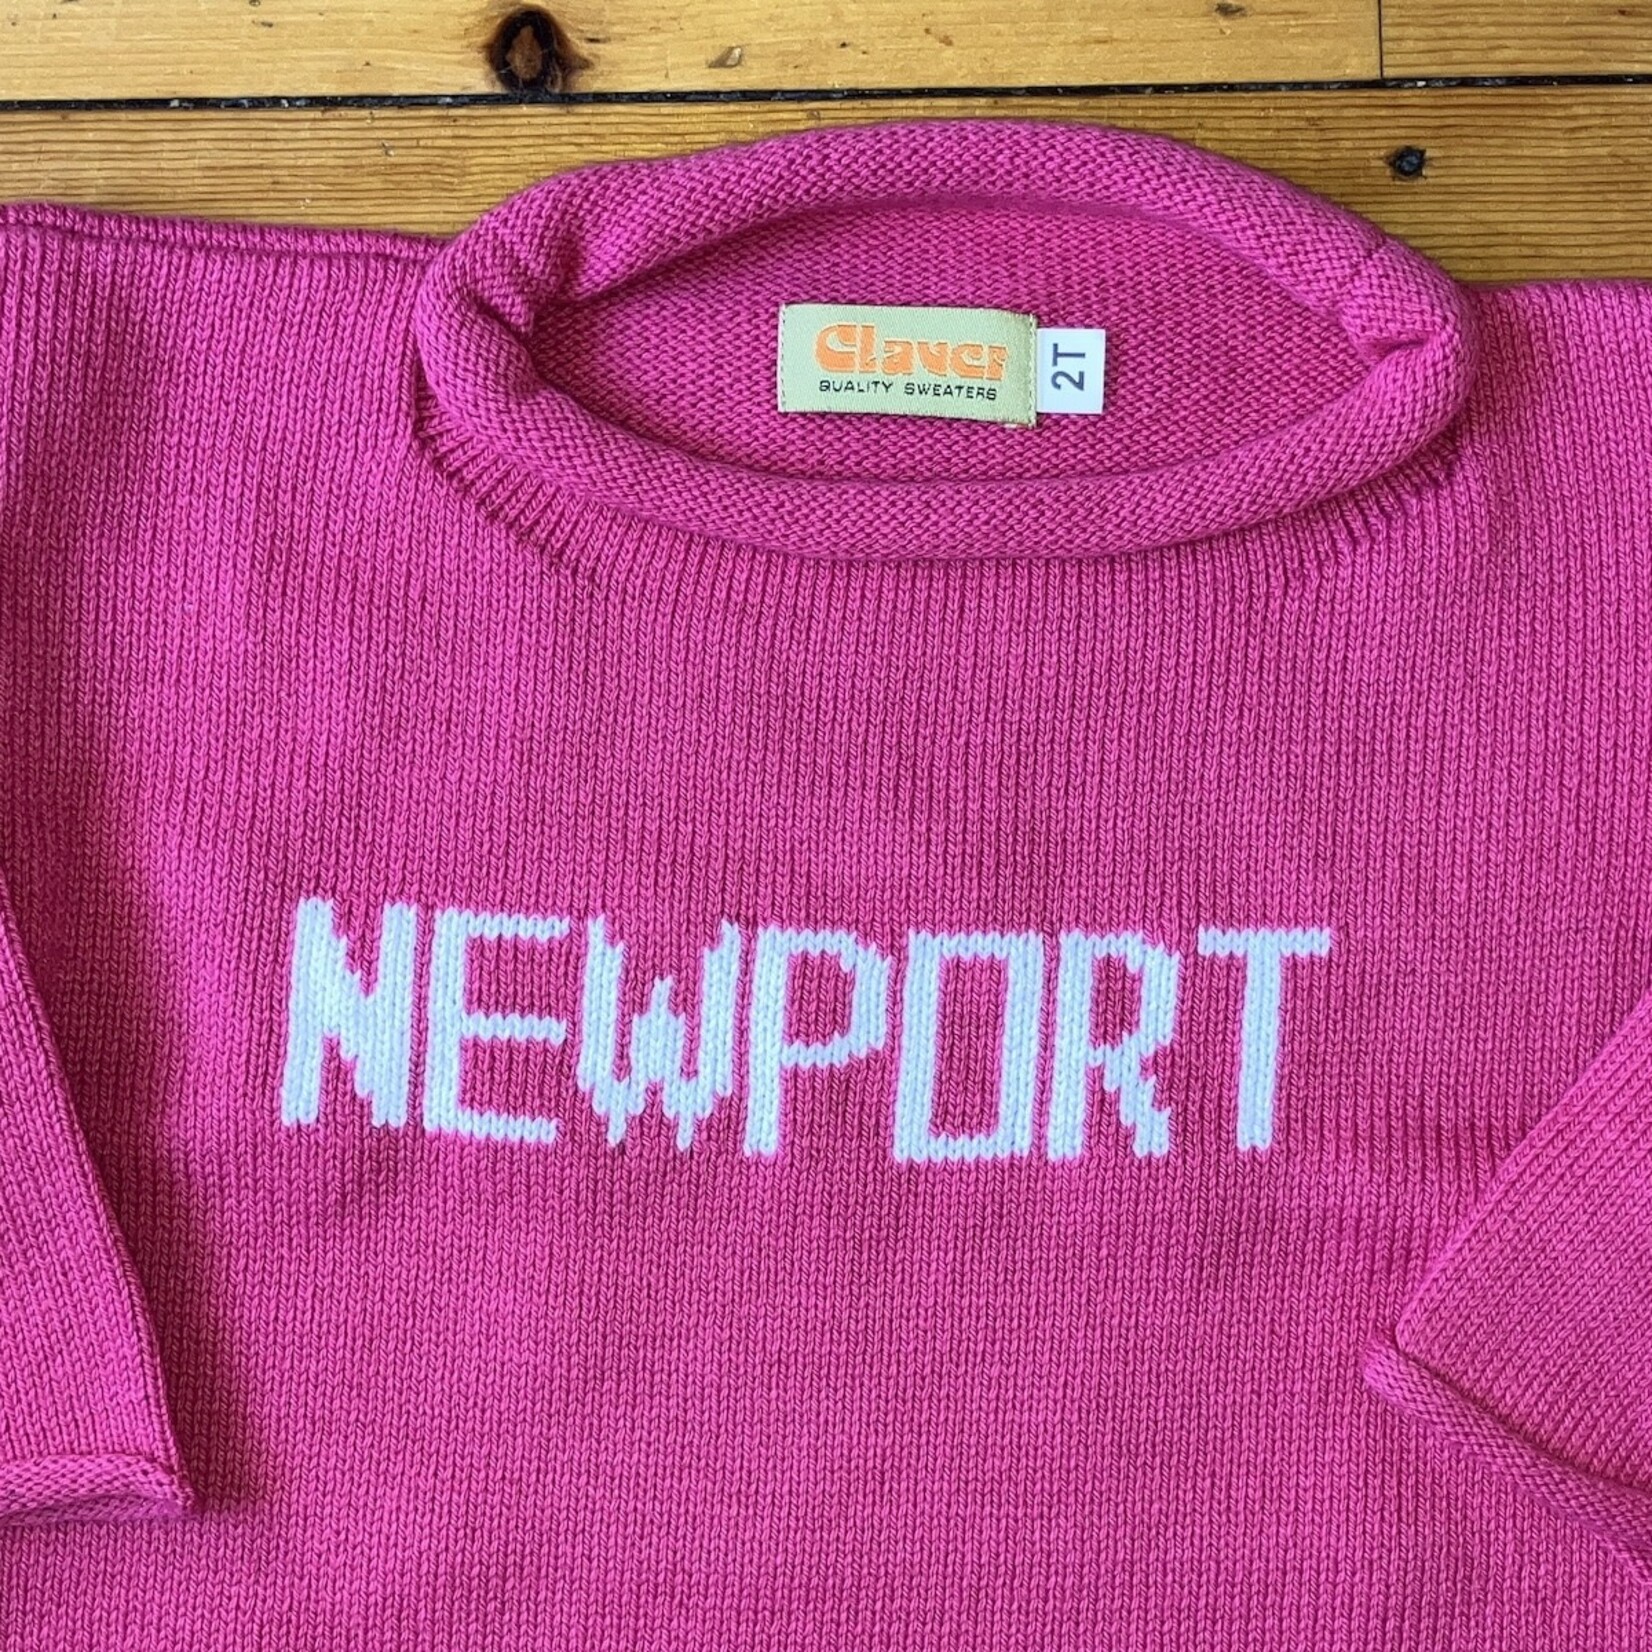 ACVISA/CLAVER Knitted Pink Newport Sweater